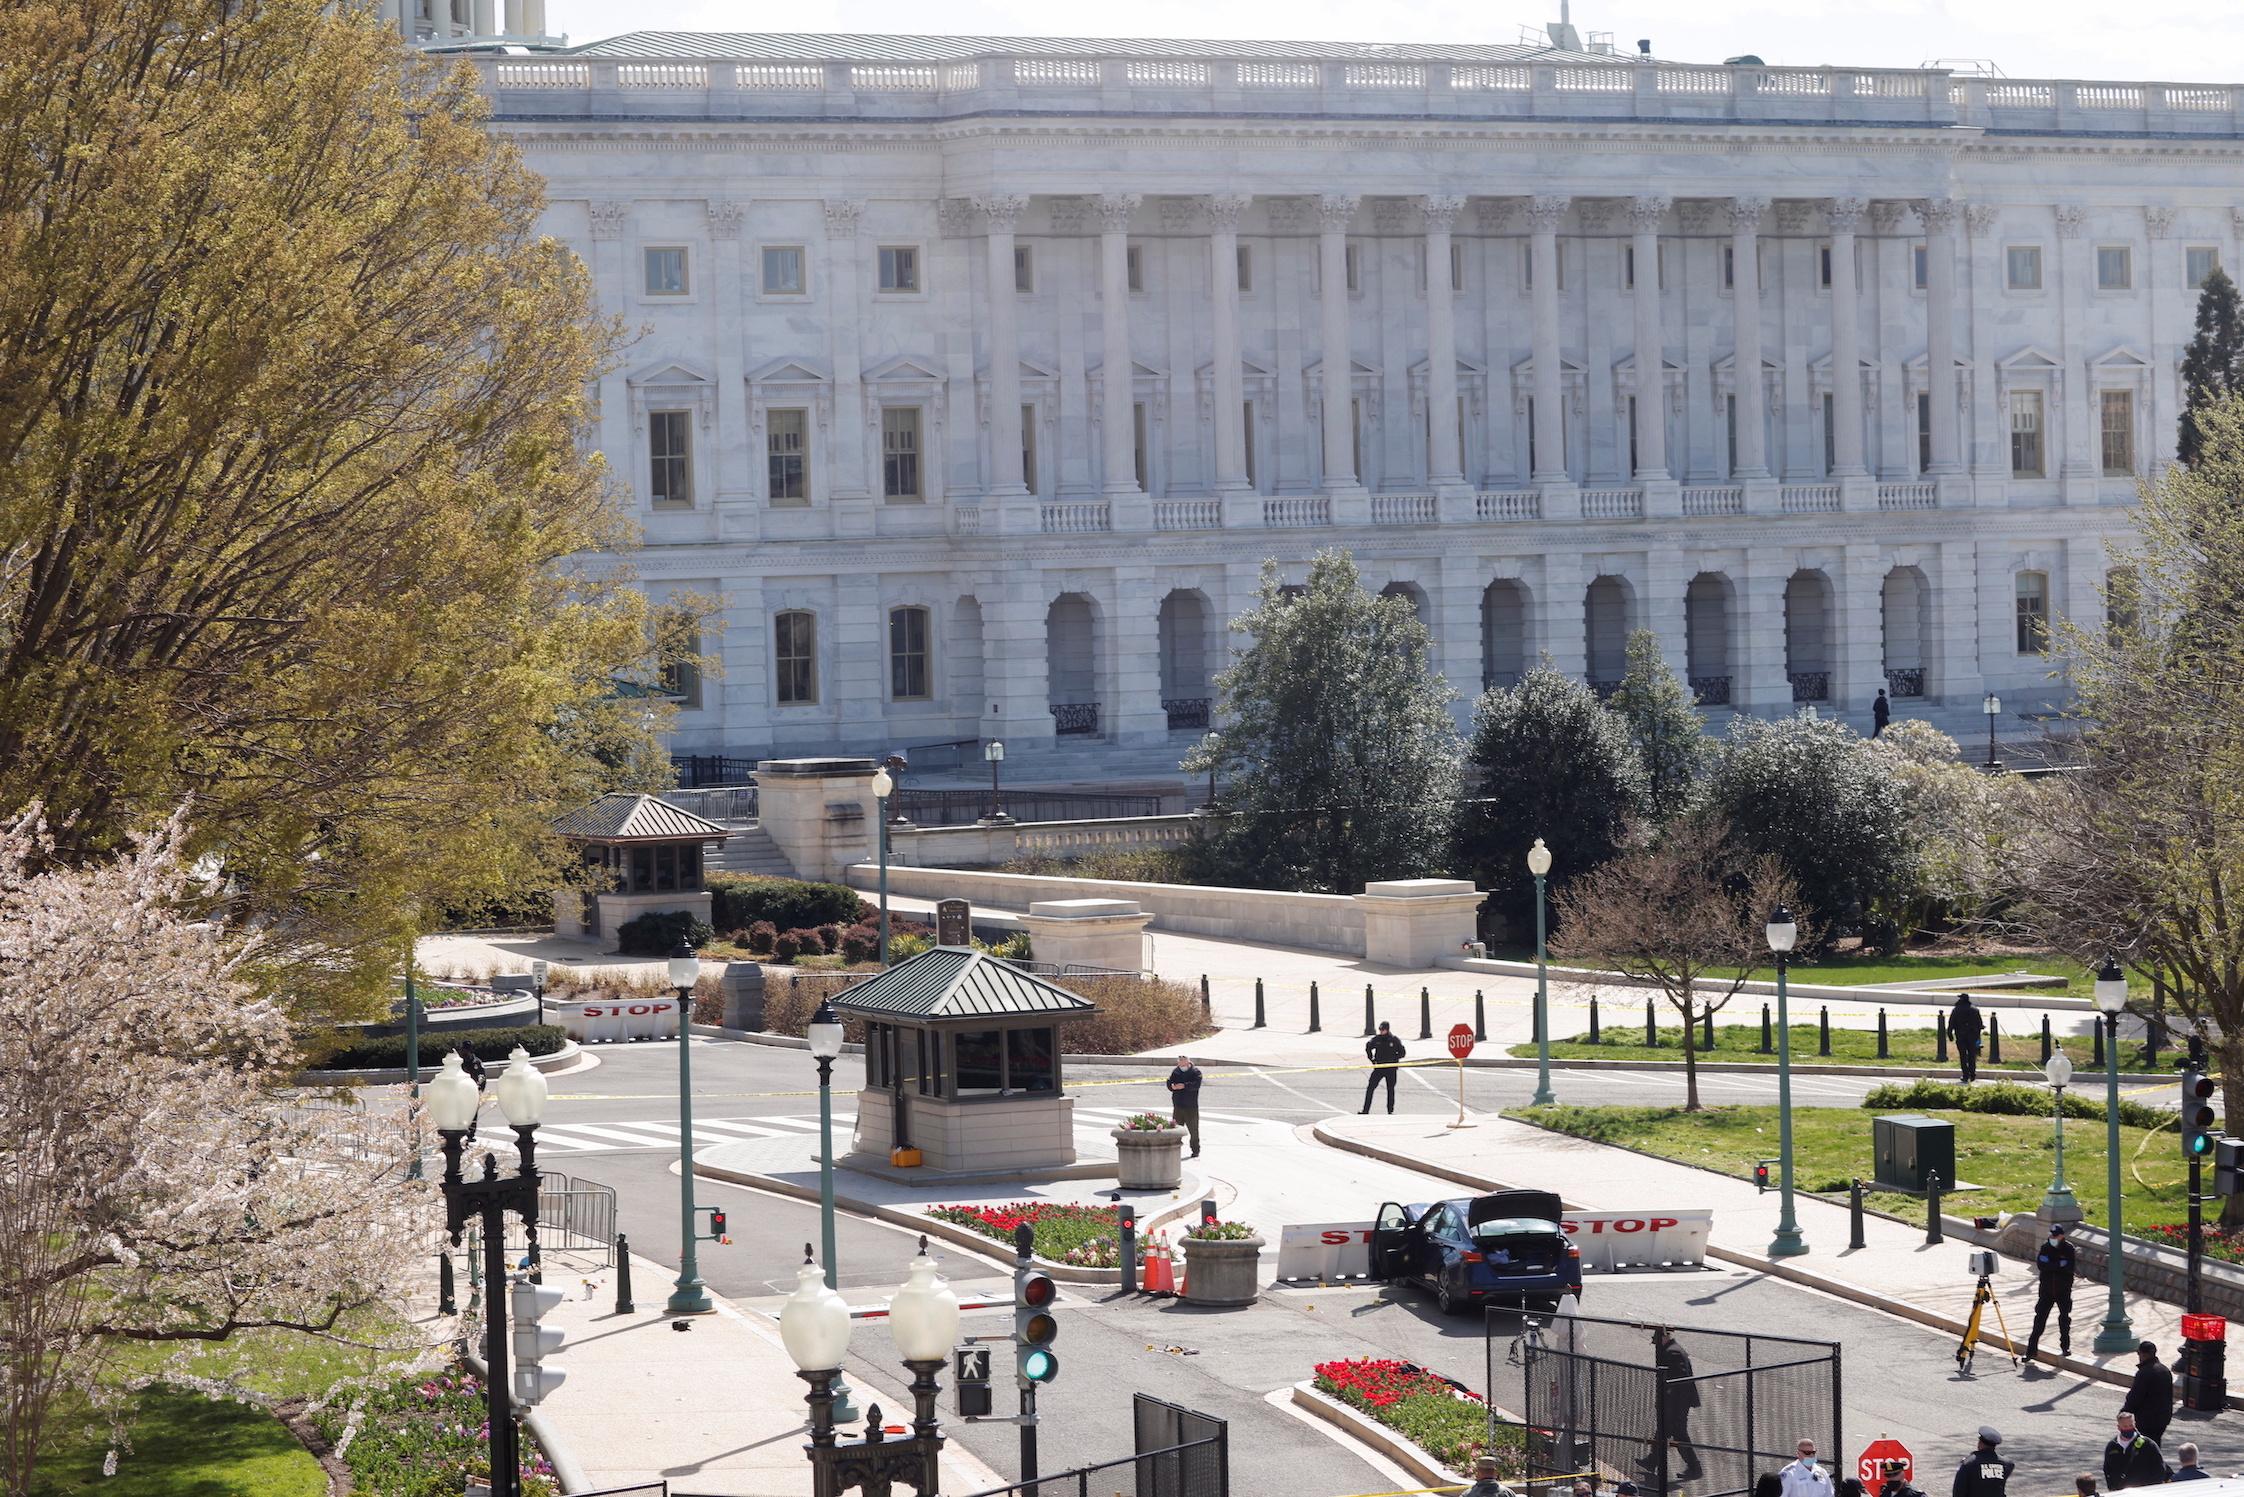 Active shooter reported at US Capitol, police say thumbnail